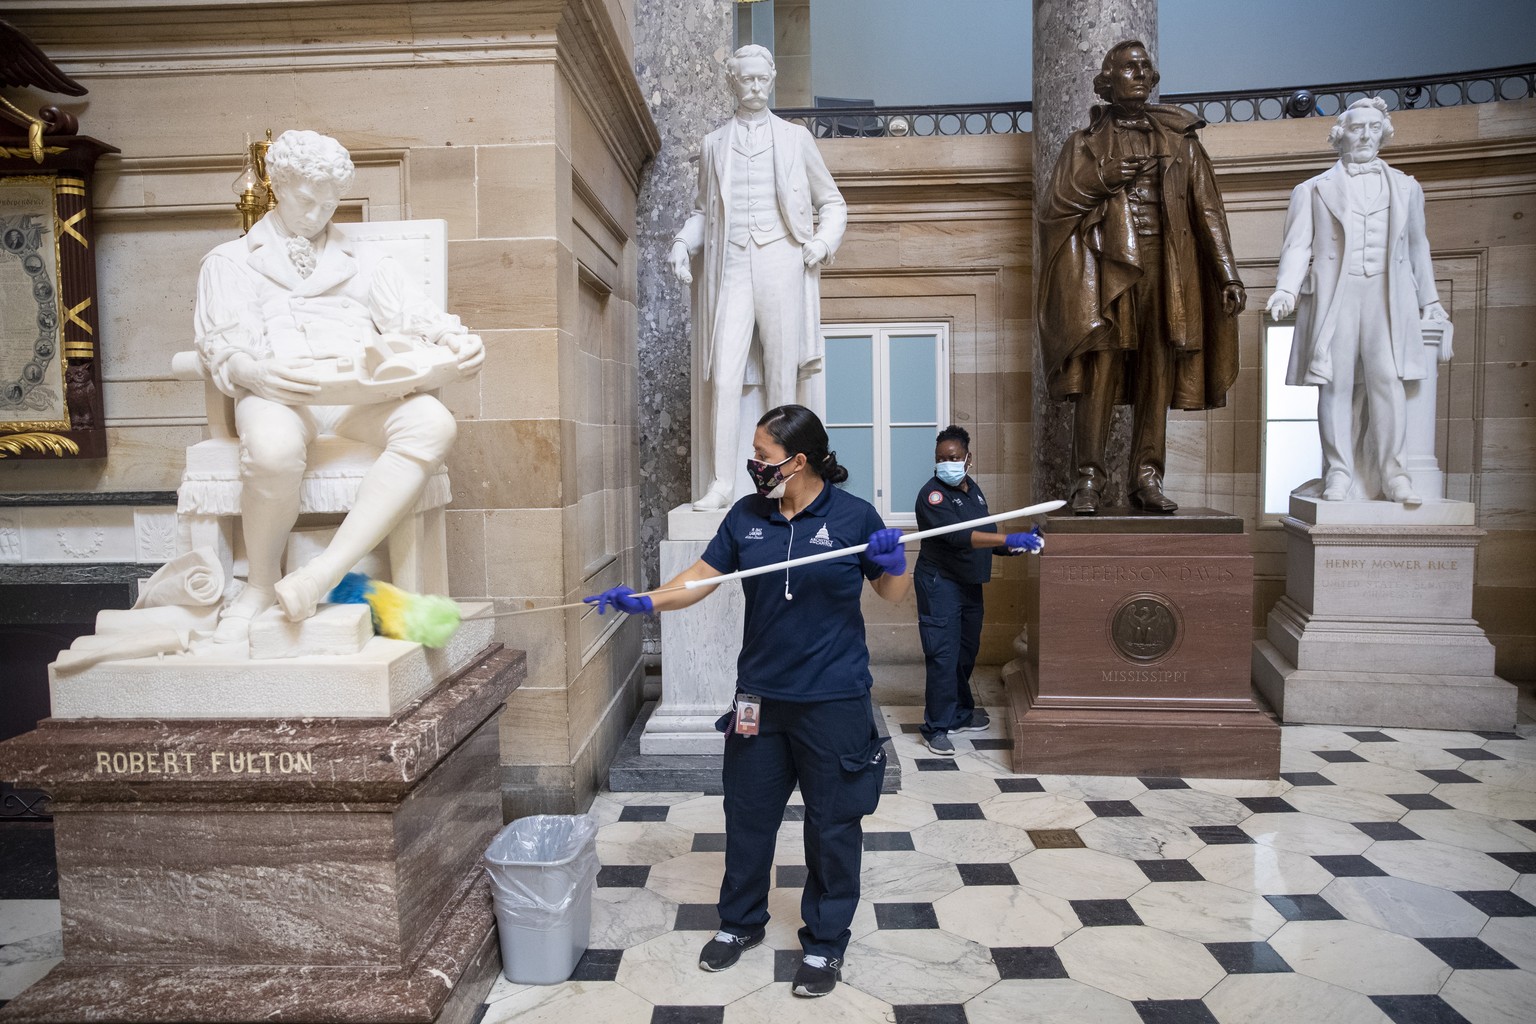 epa08925002 A cleaning crew dusts residue from the pedestals of the statues in Statuary Hall inside the US Capitol in Washington, DC, USA, 07 January 2021, the morning after various groups of Presiden ...